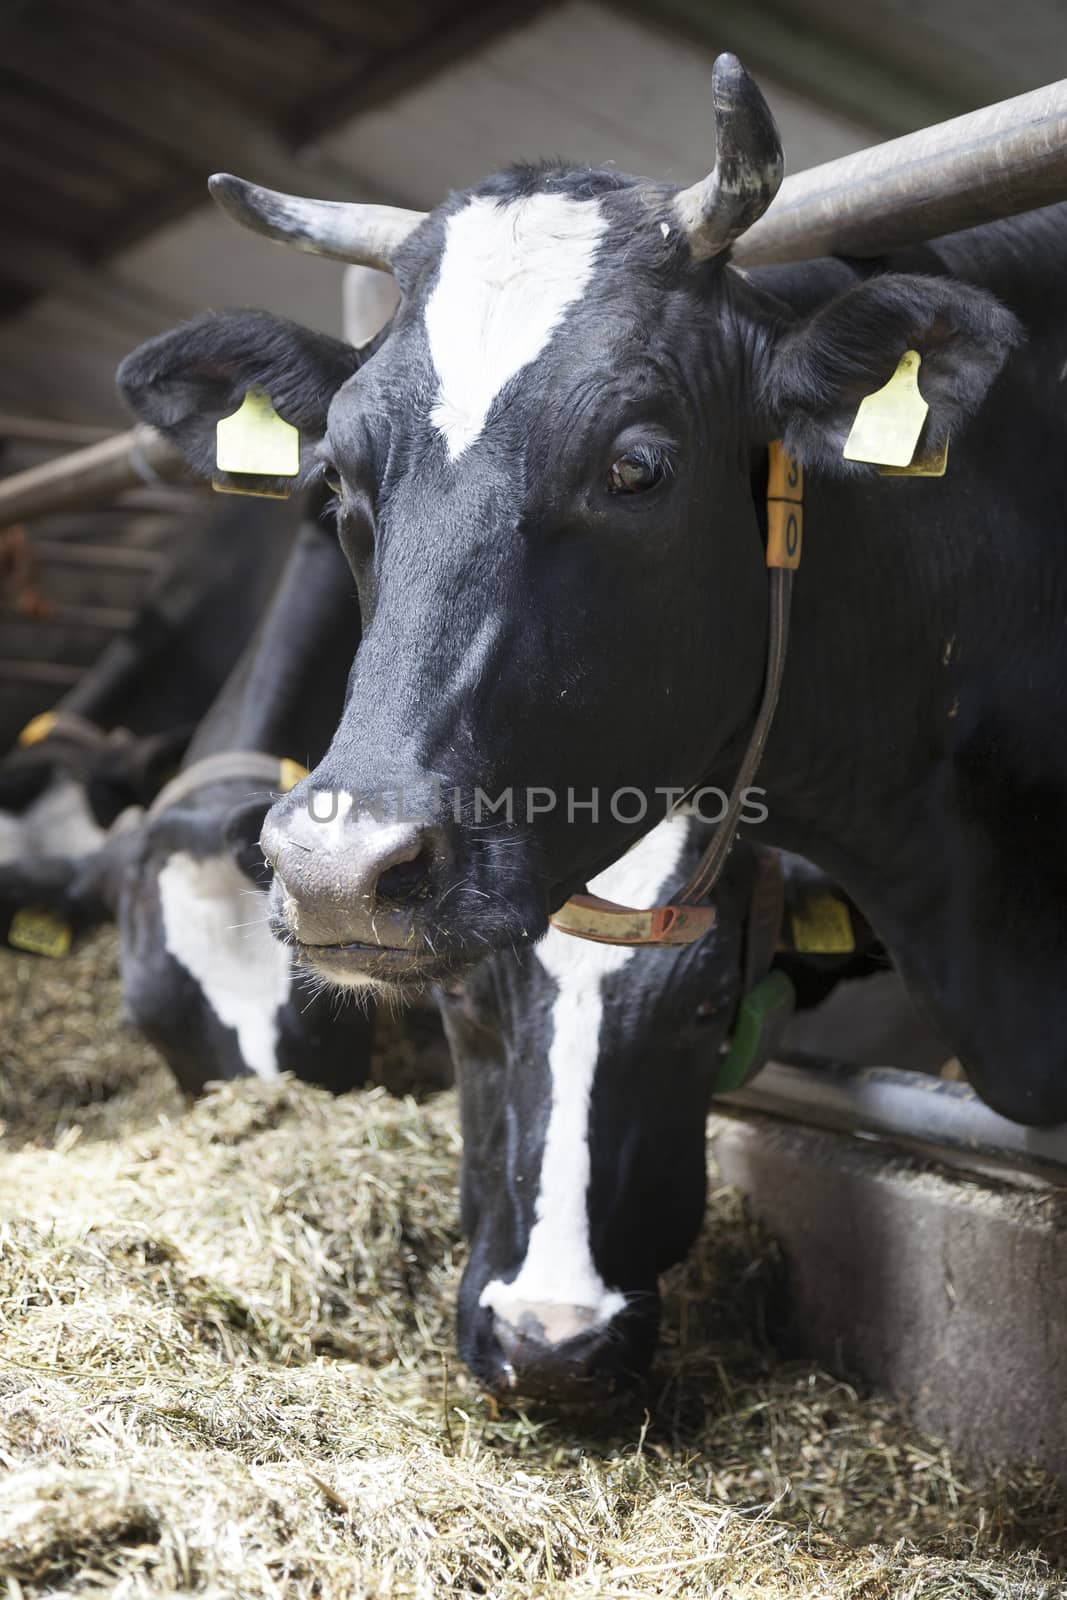 black and white cow in stable looks by ahavelaar